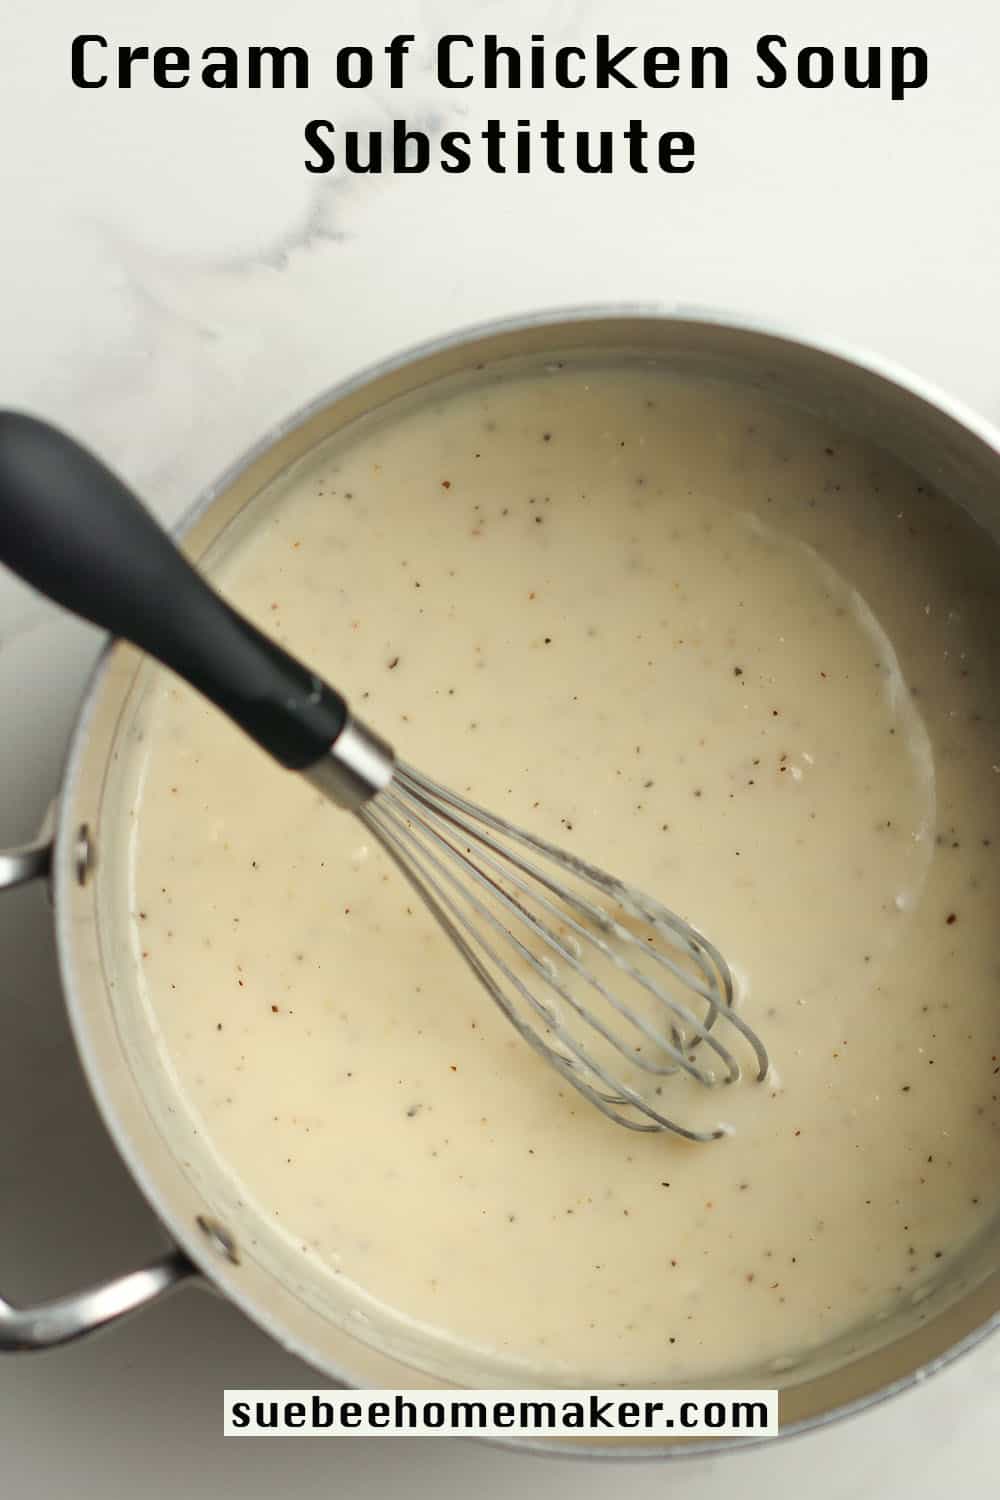 A pan of the cream of chicken soup substitute.